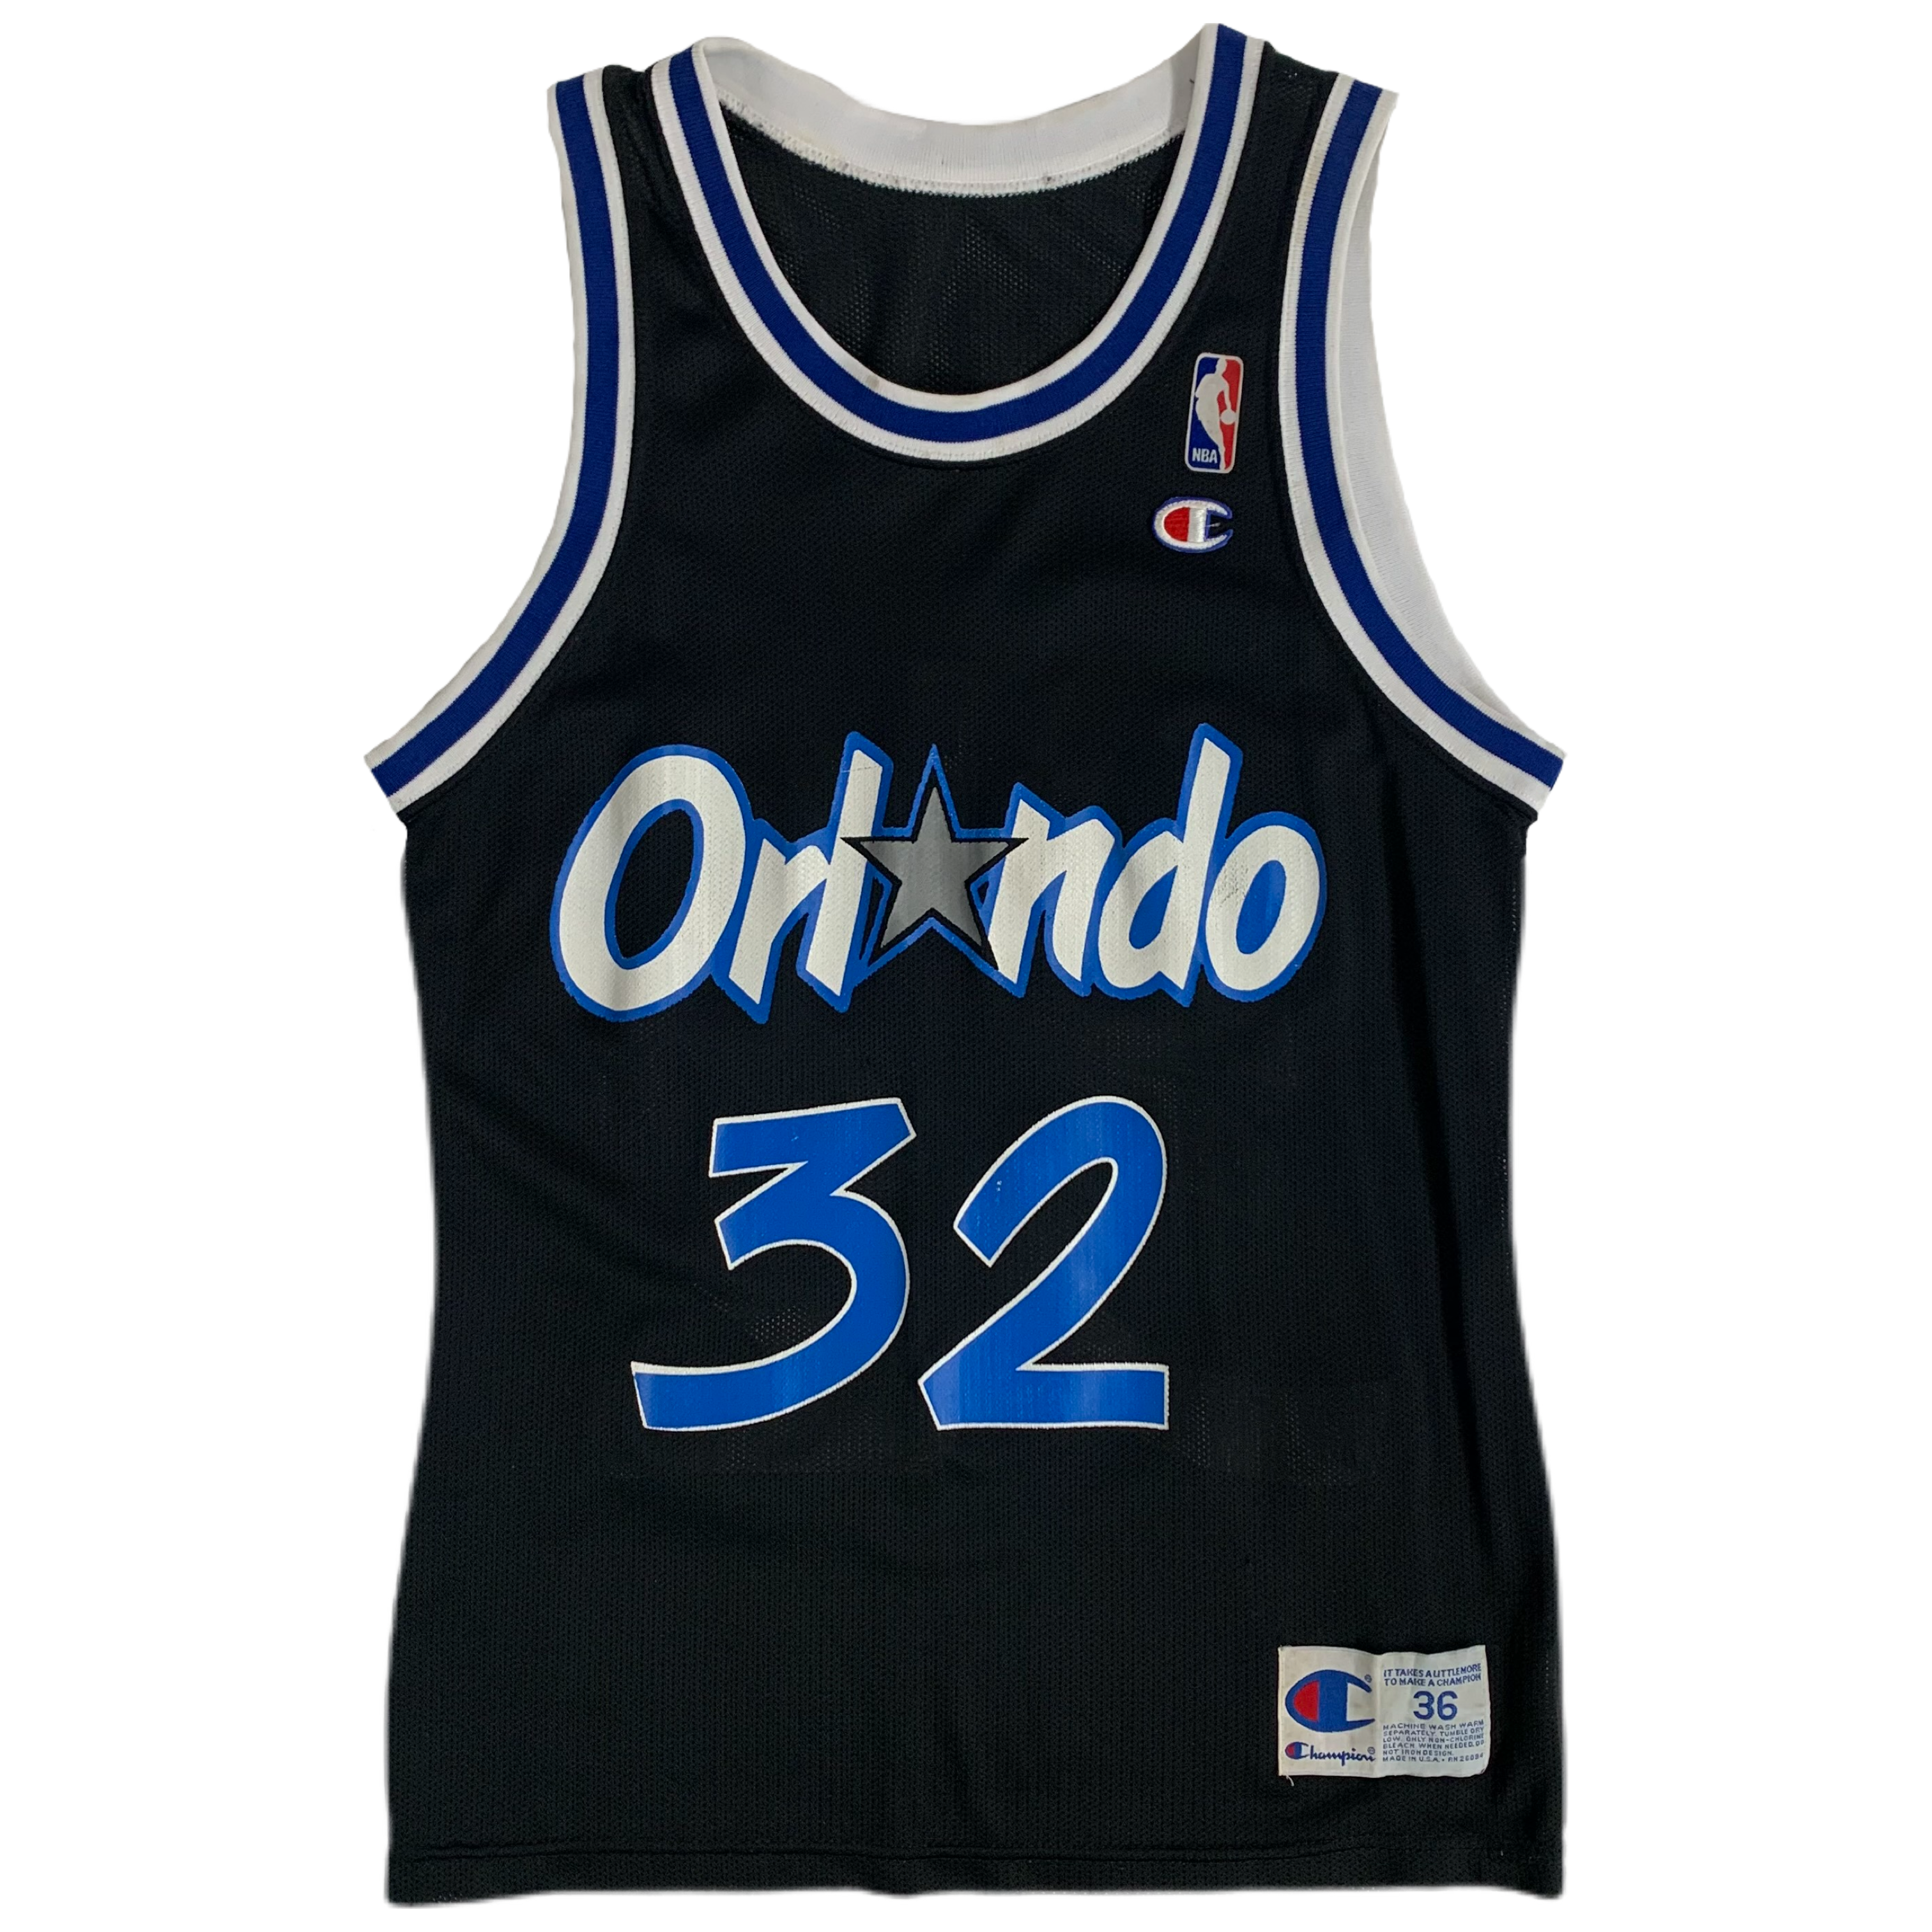 Authentic Shaquille O'Neal Orlando Magic Champion Jersey Size 44